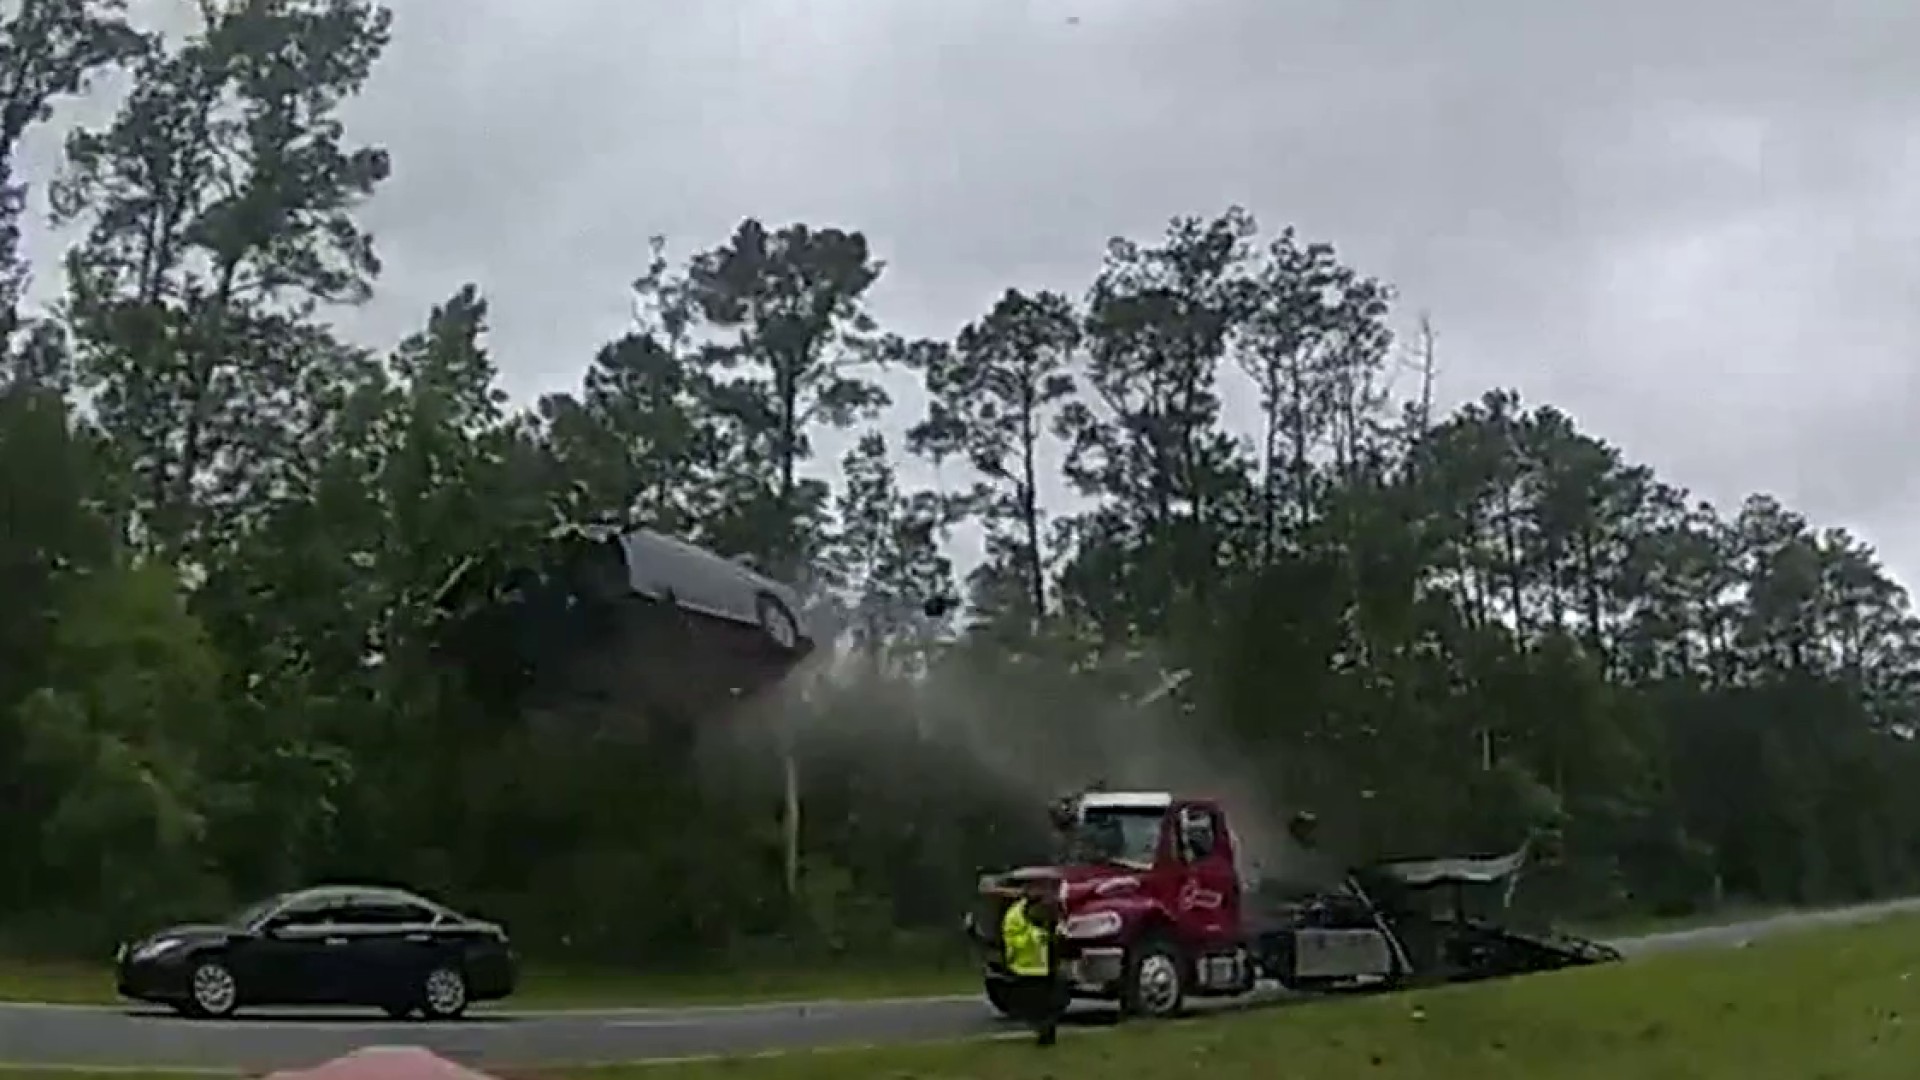 Video shows car hit tow truck ramp, fly 120-feet in the air before crashing  down on highway